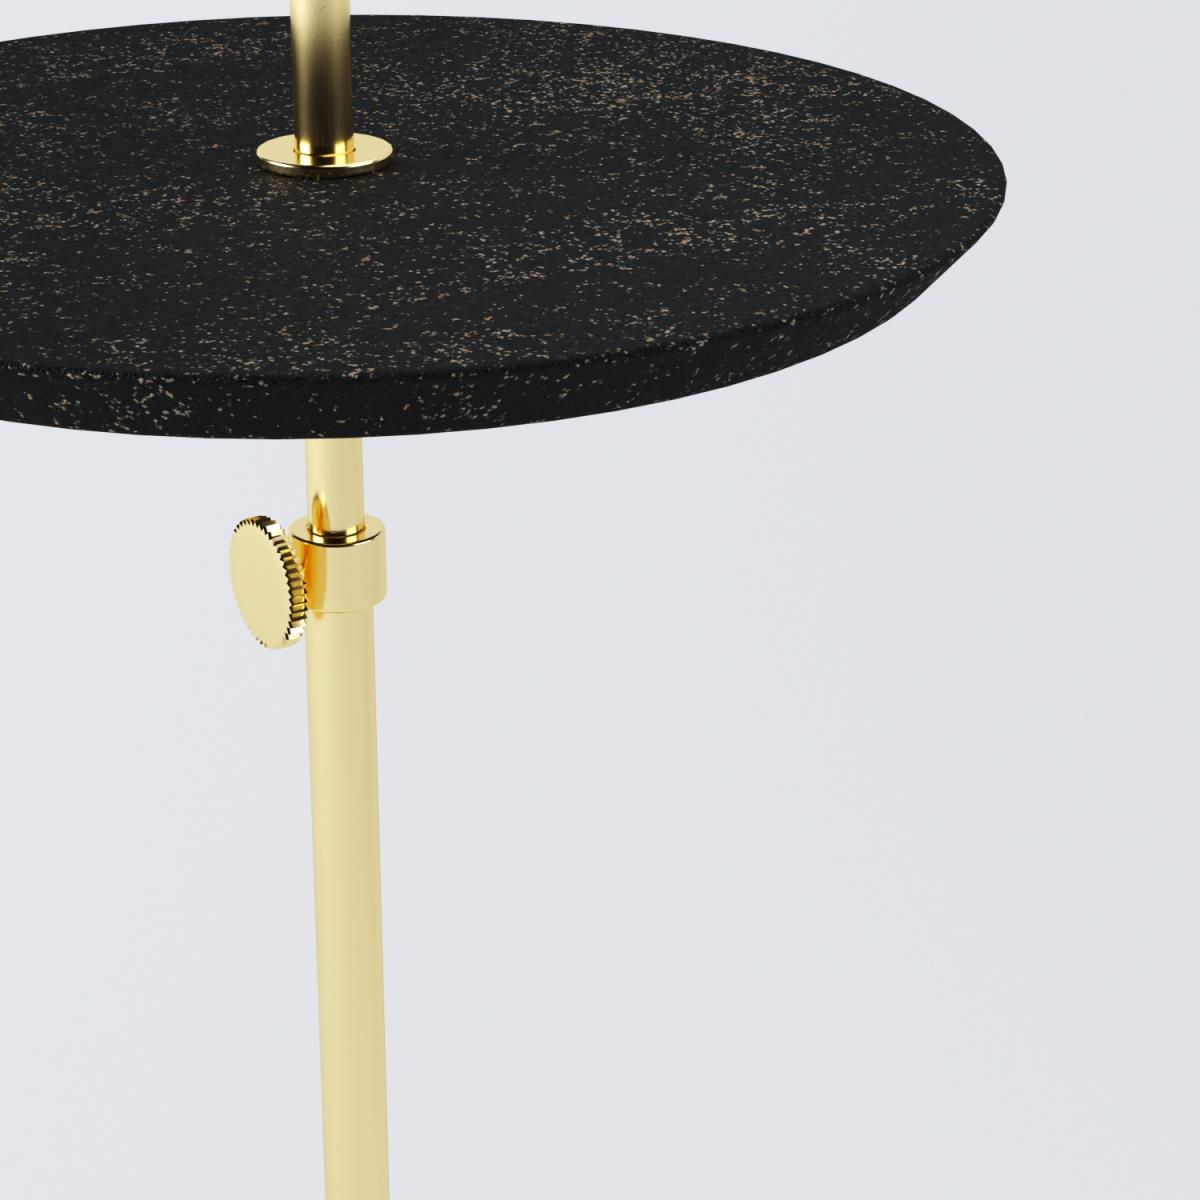 The disco side table was developed to be easy, both in transport and in height adjustment, so it adapts to any indoor environment.
The height of the top can be adjusted using the pin located next to the stem, its finishes, like the entire Disco